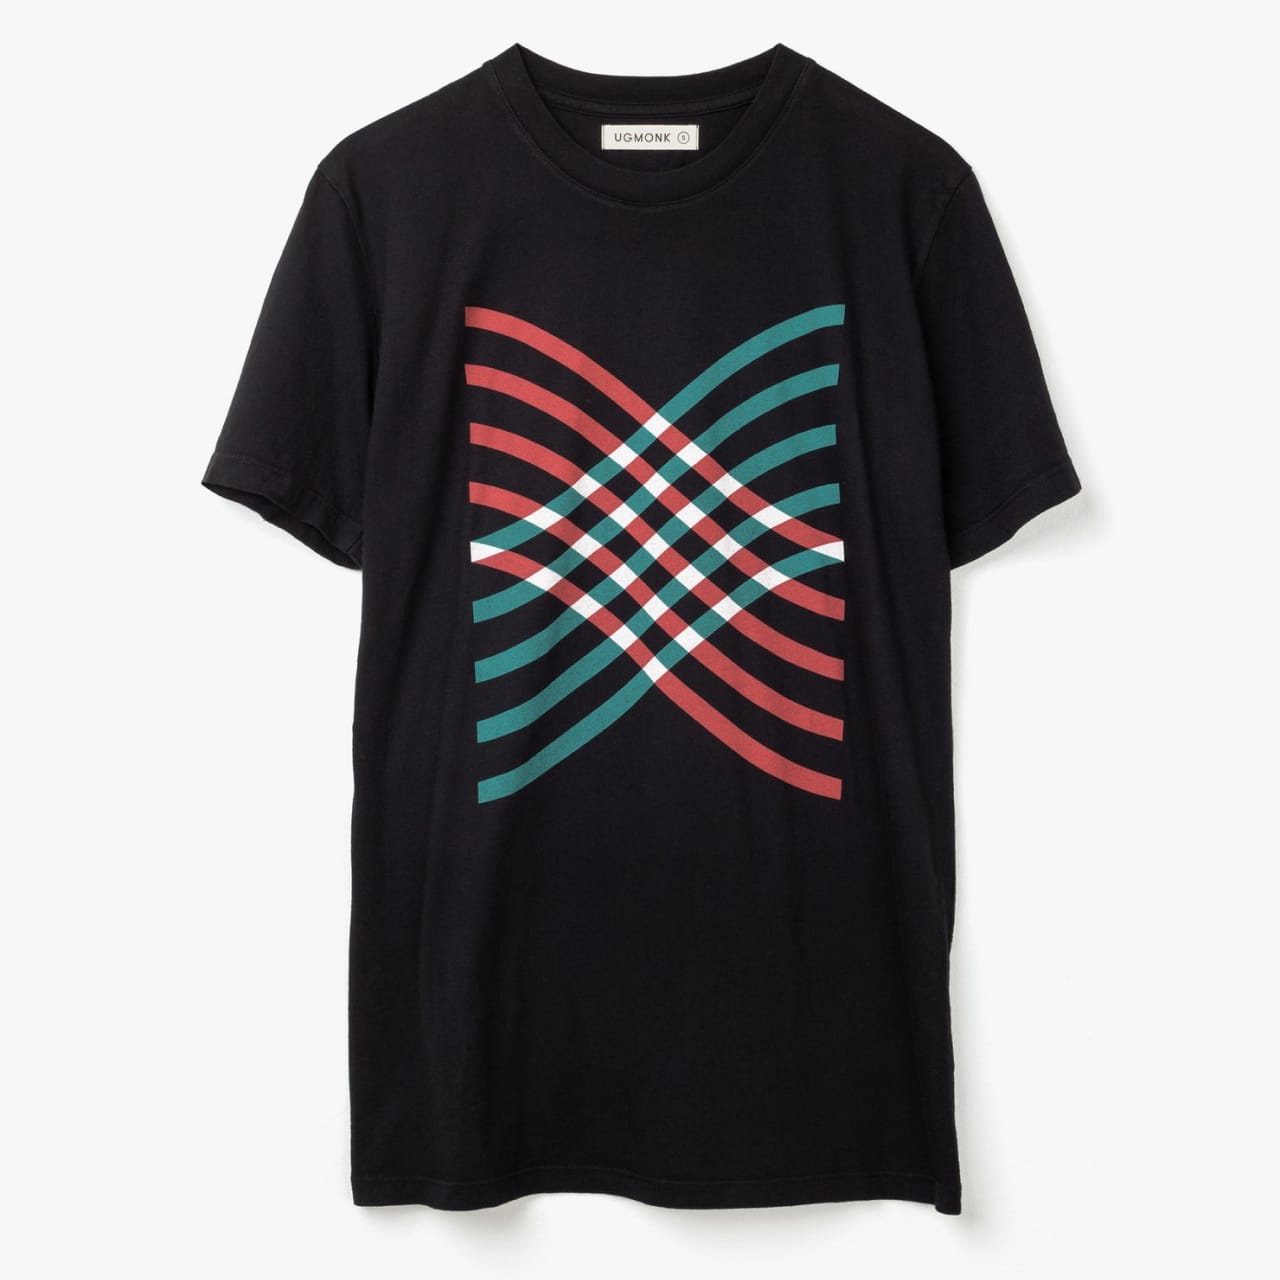 Black tee with intersecting red, white, and green curved lines on front.